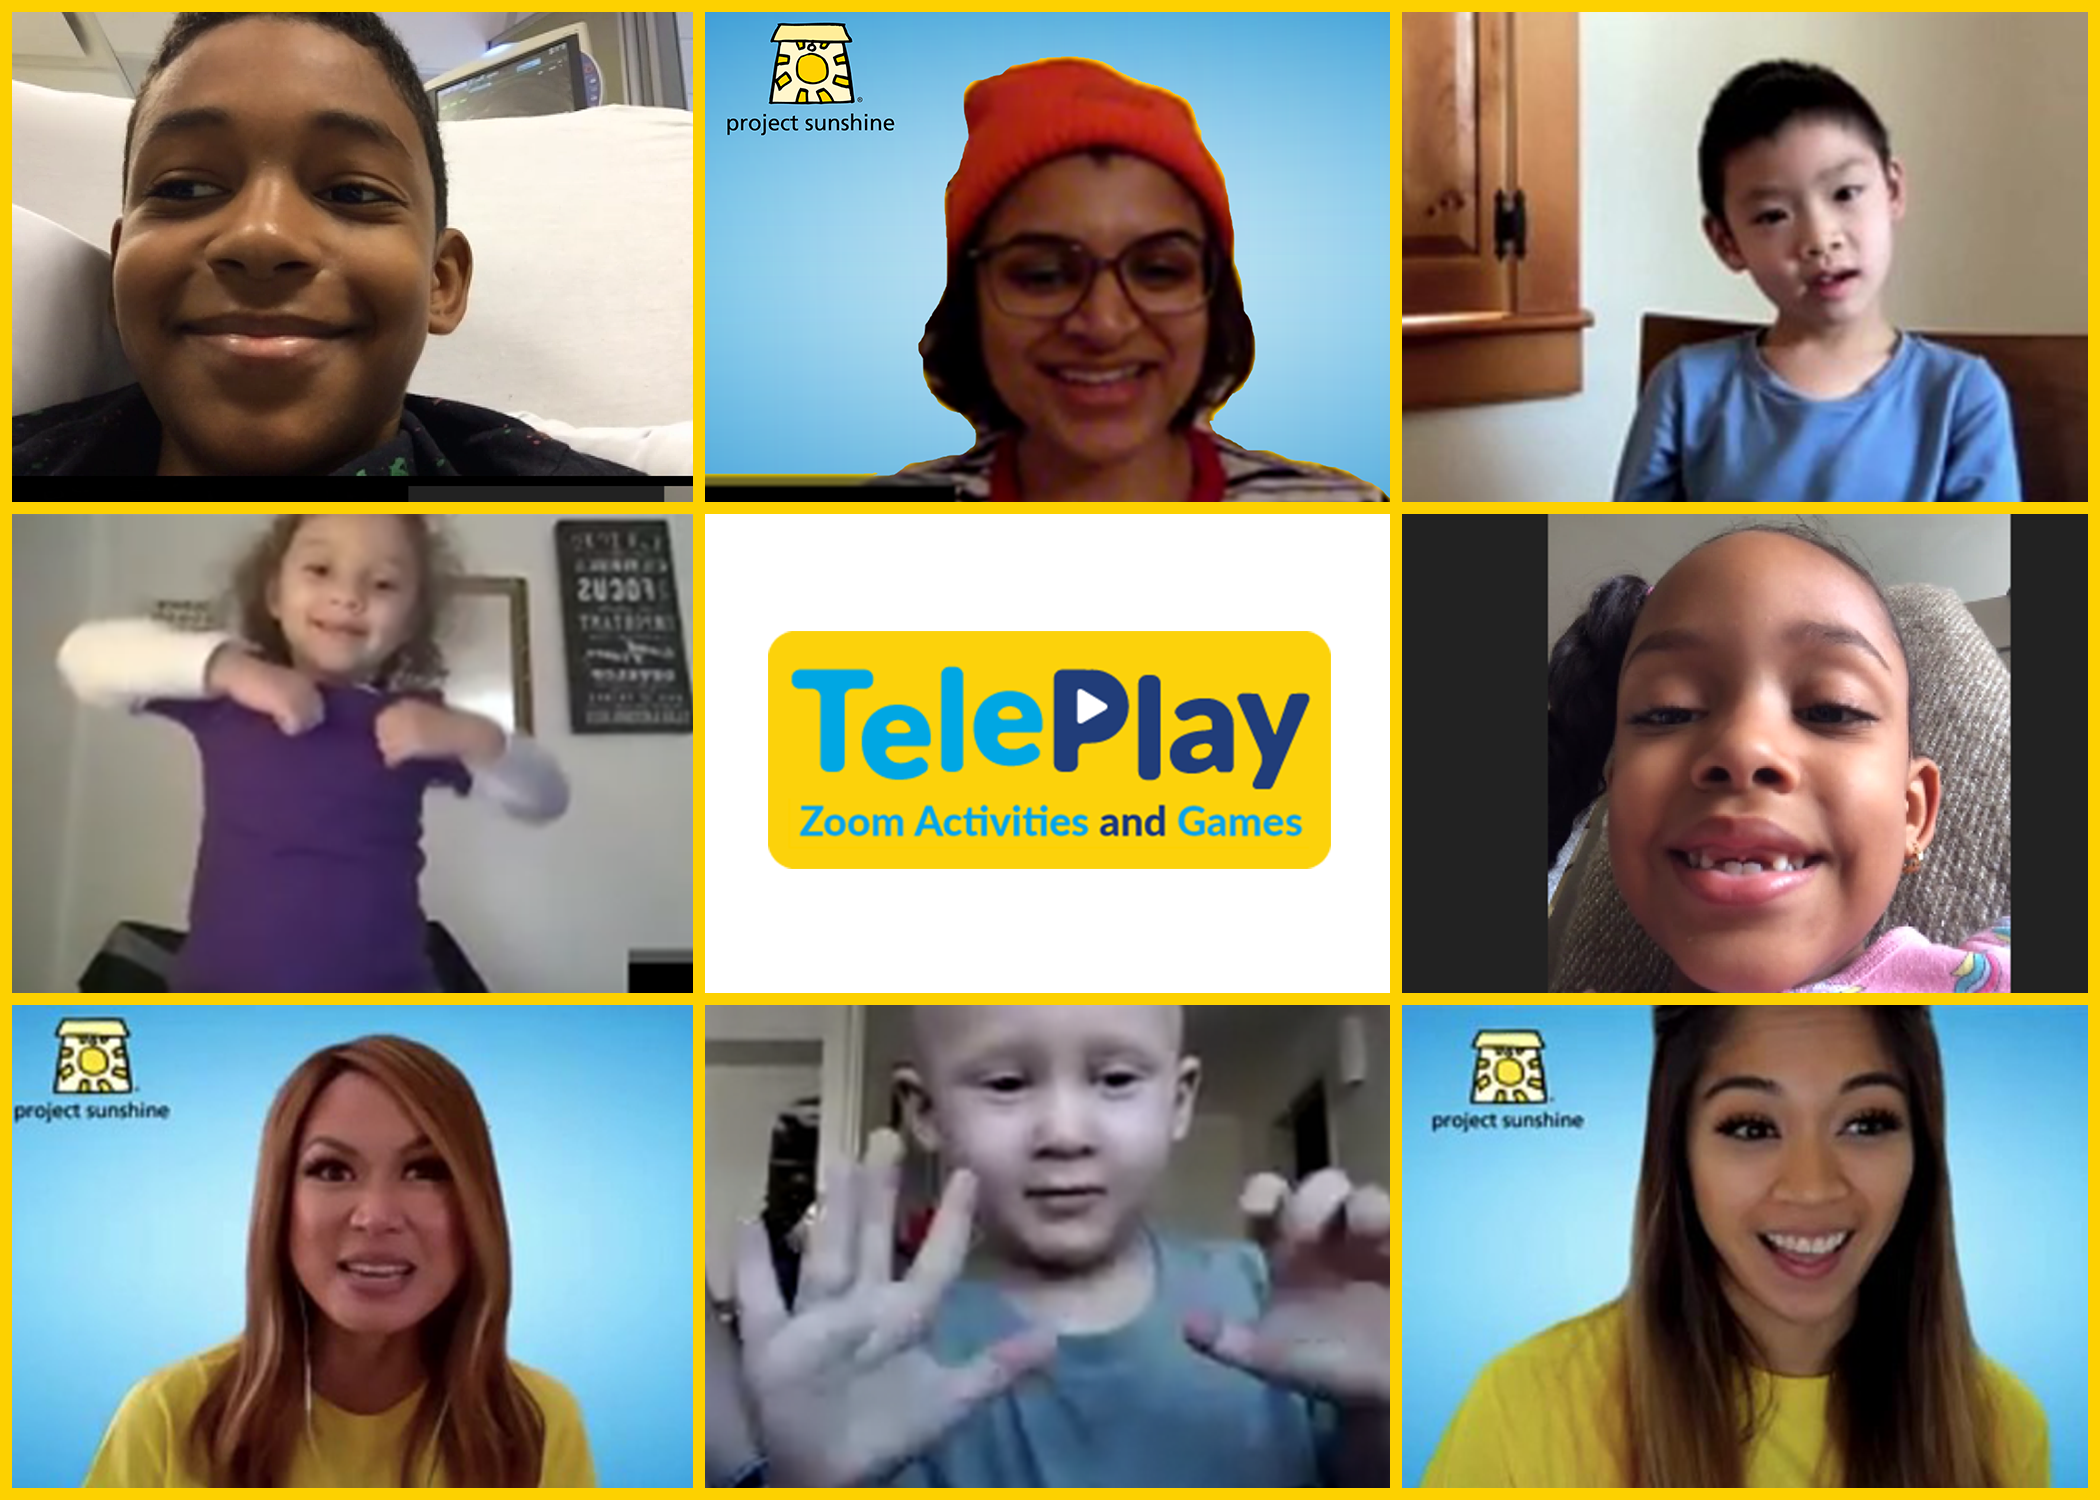 TelePlay Partnerships Bring Play and Human Connection to Pediatric Patients